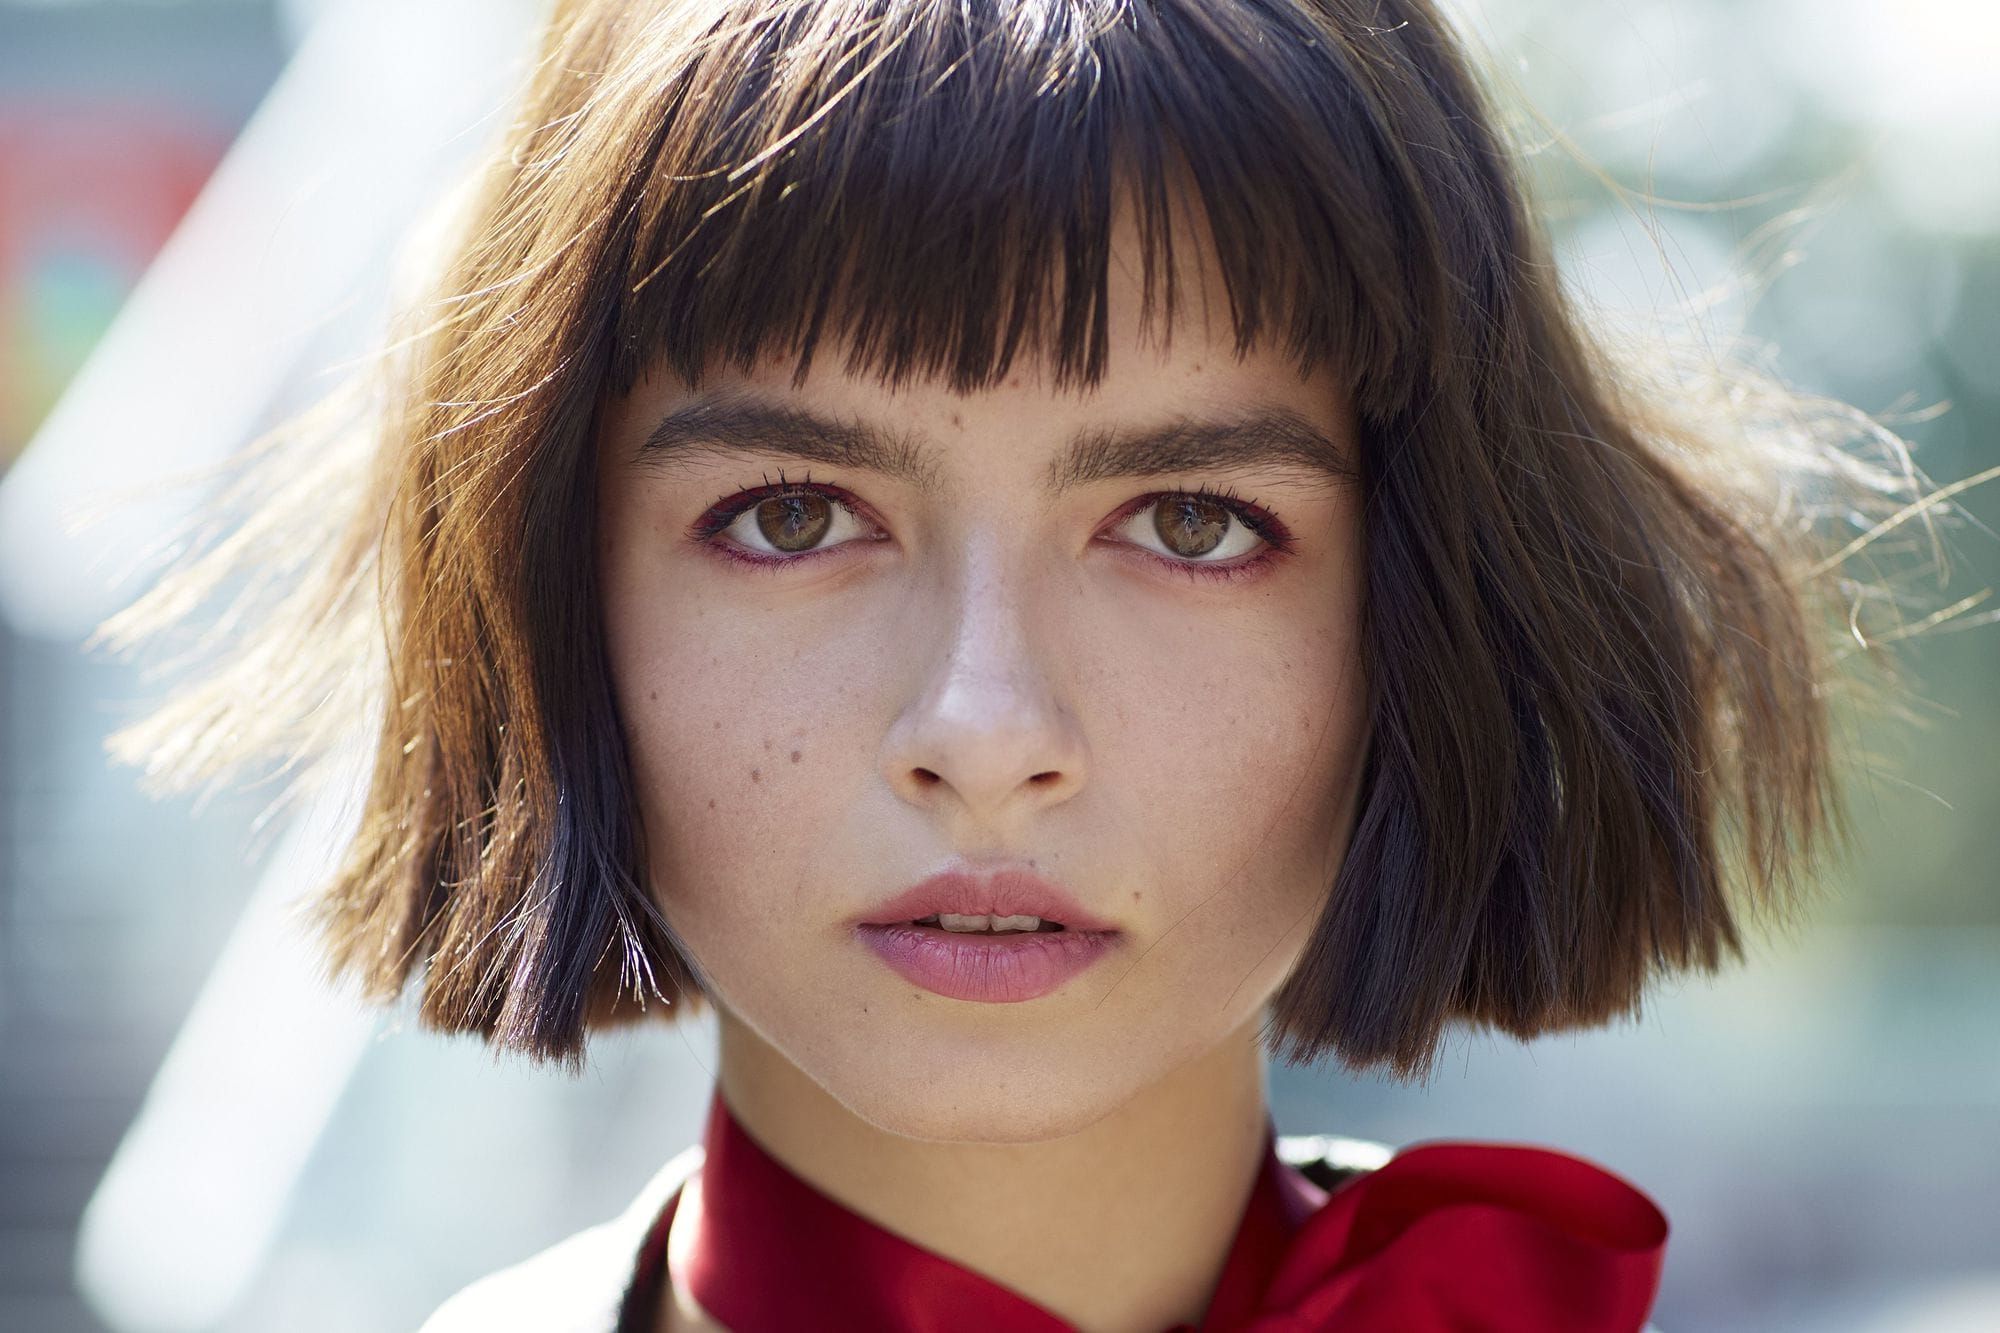 Short Hair With A Fringe: 8 Ways To Rock The Look Like A True Inside Short Haircuts With Bangs (View 20 of 25)